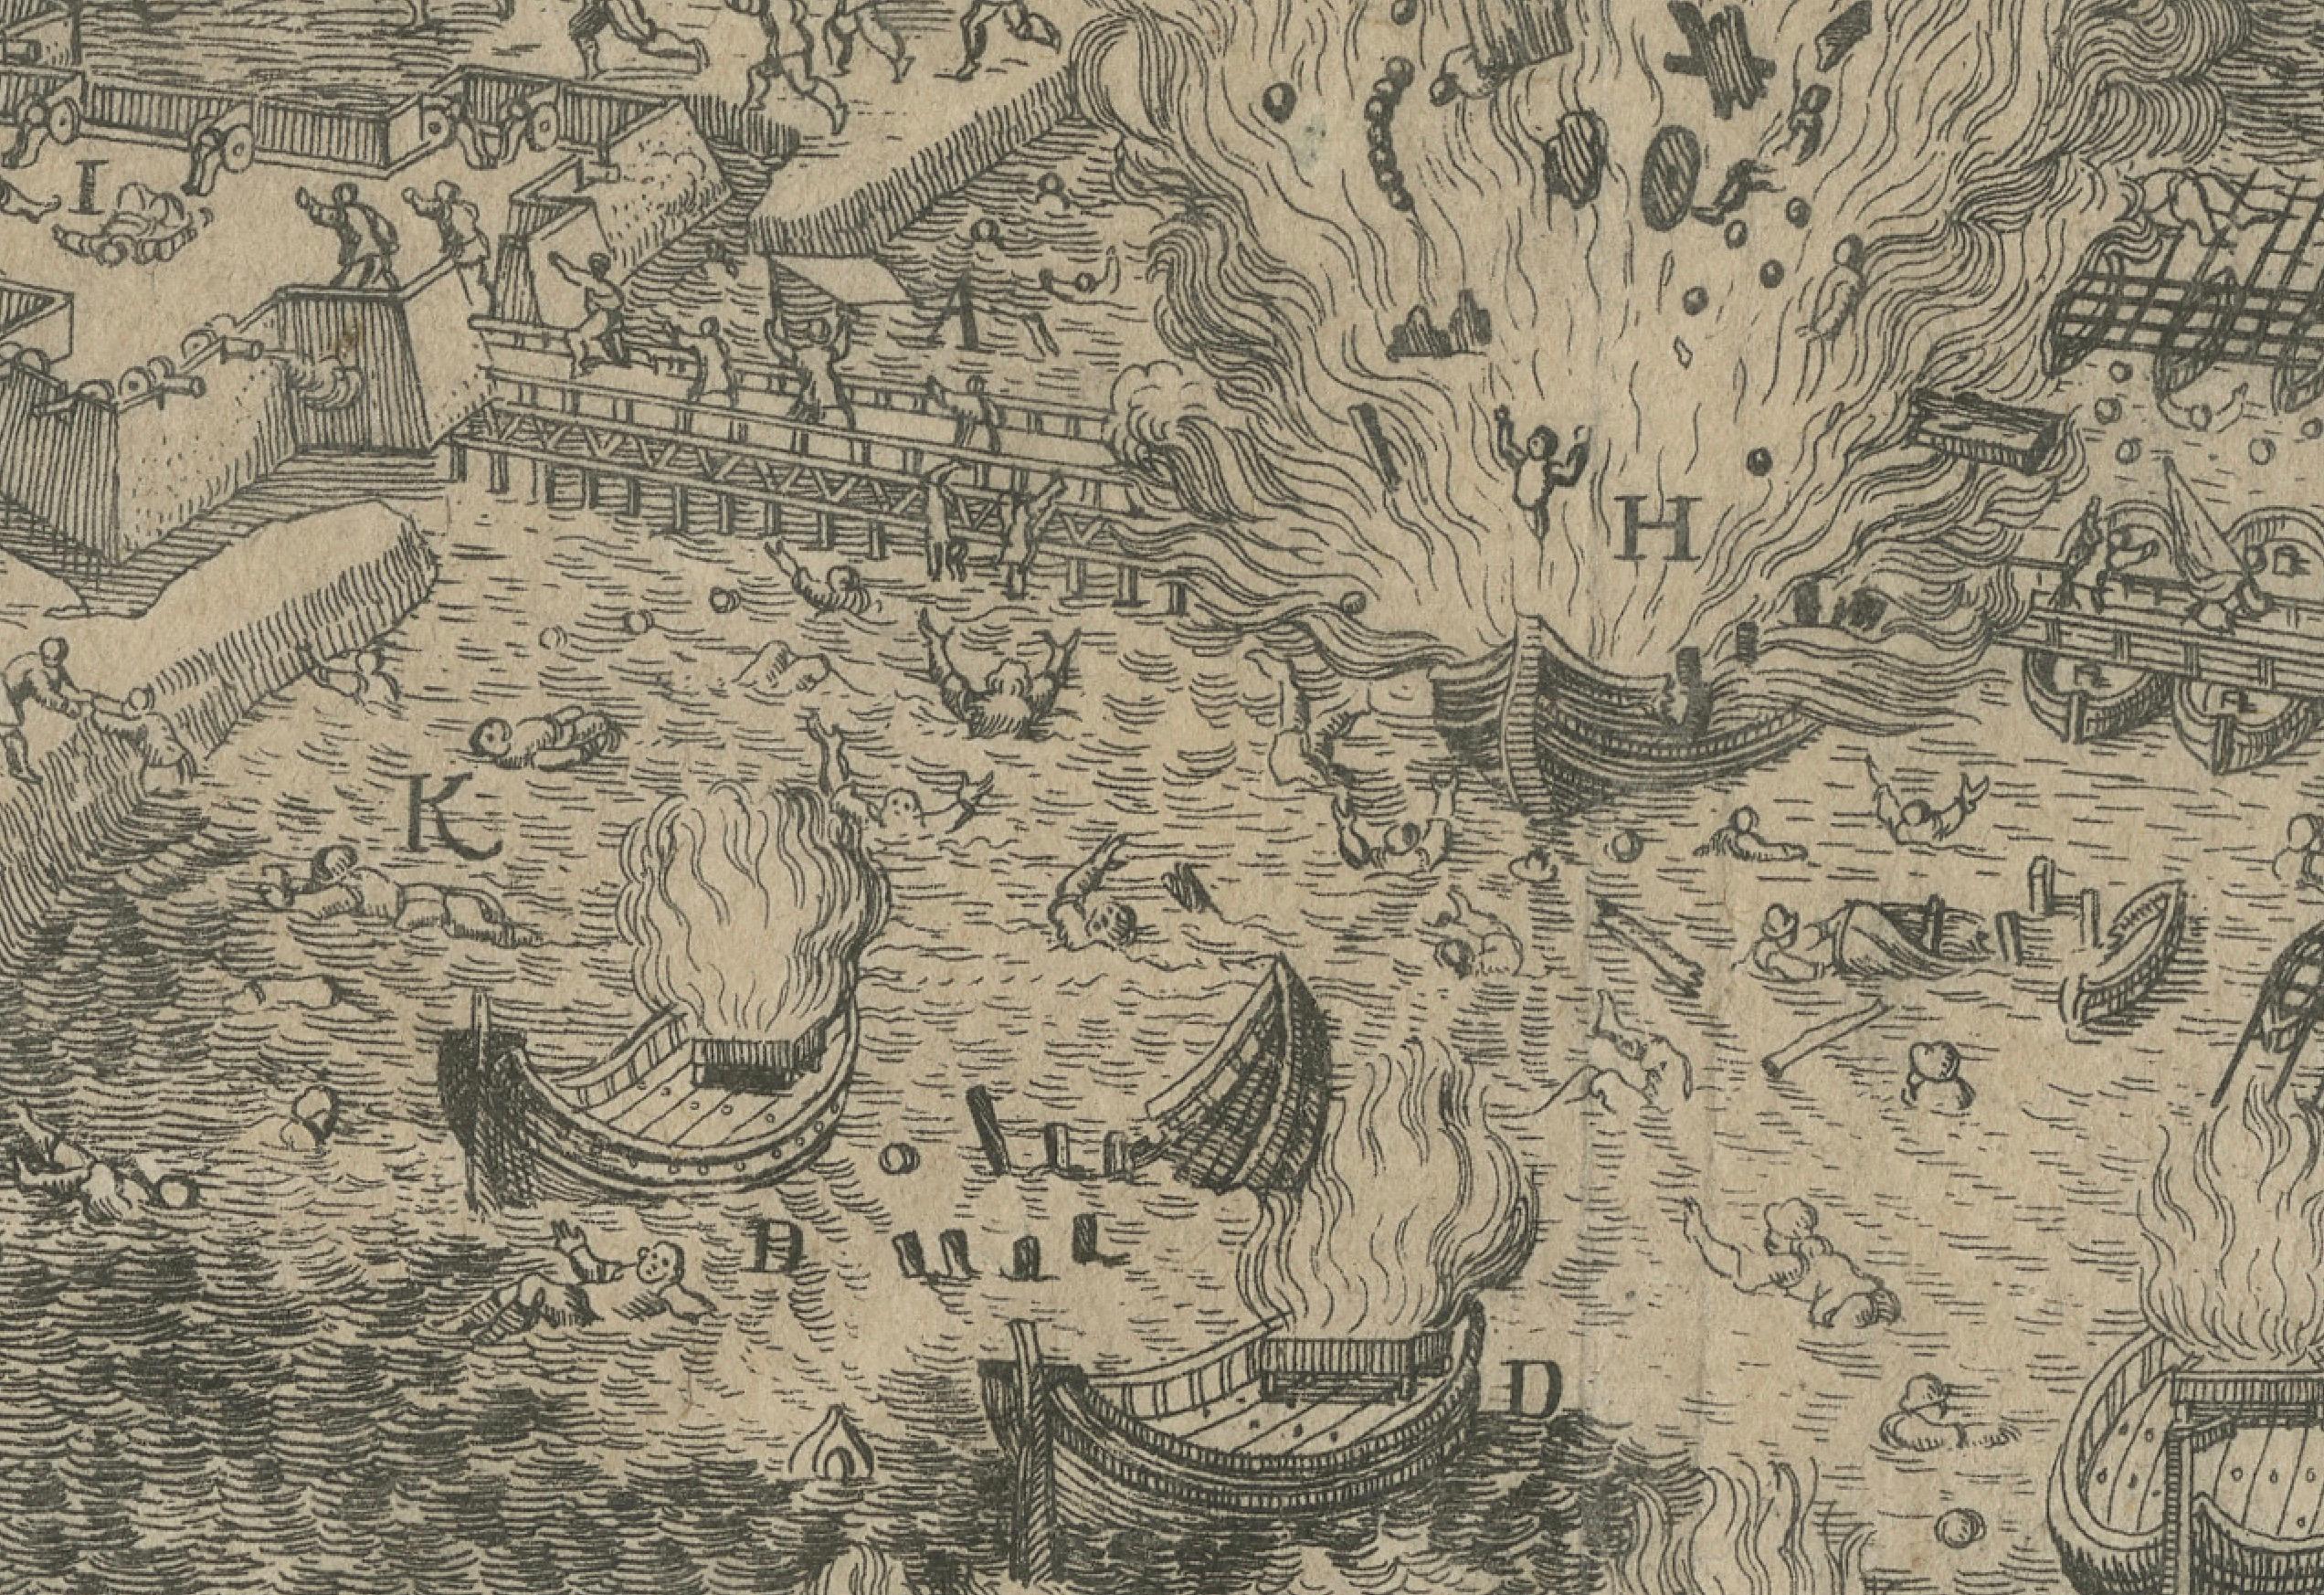 The Siege of Antwerp Engraved: Parma's Bridge Aflame on the Schelde, 1730 For Sale 2